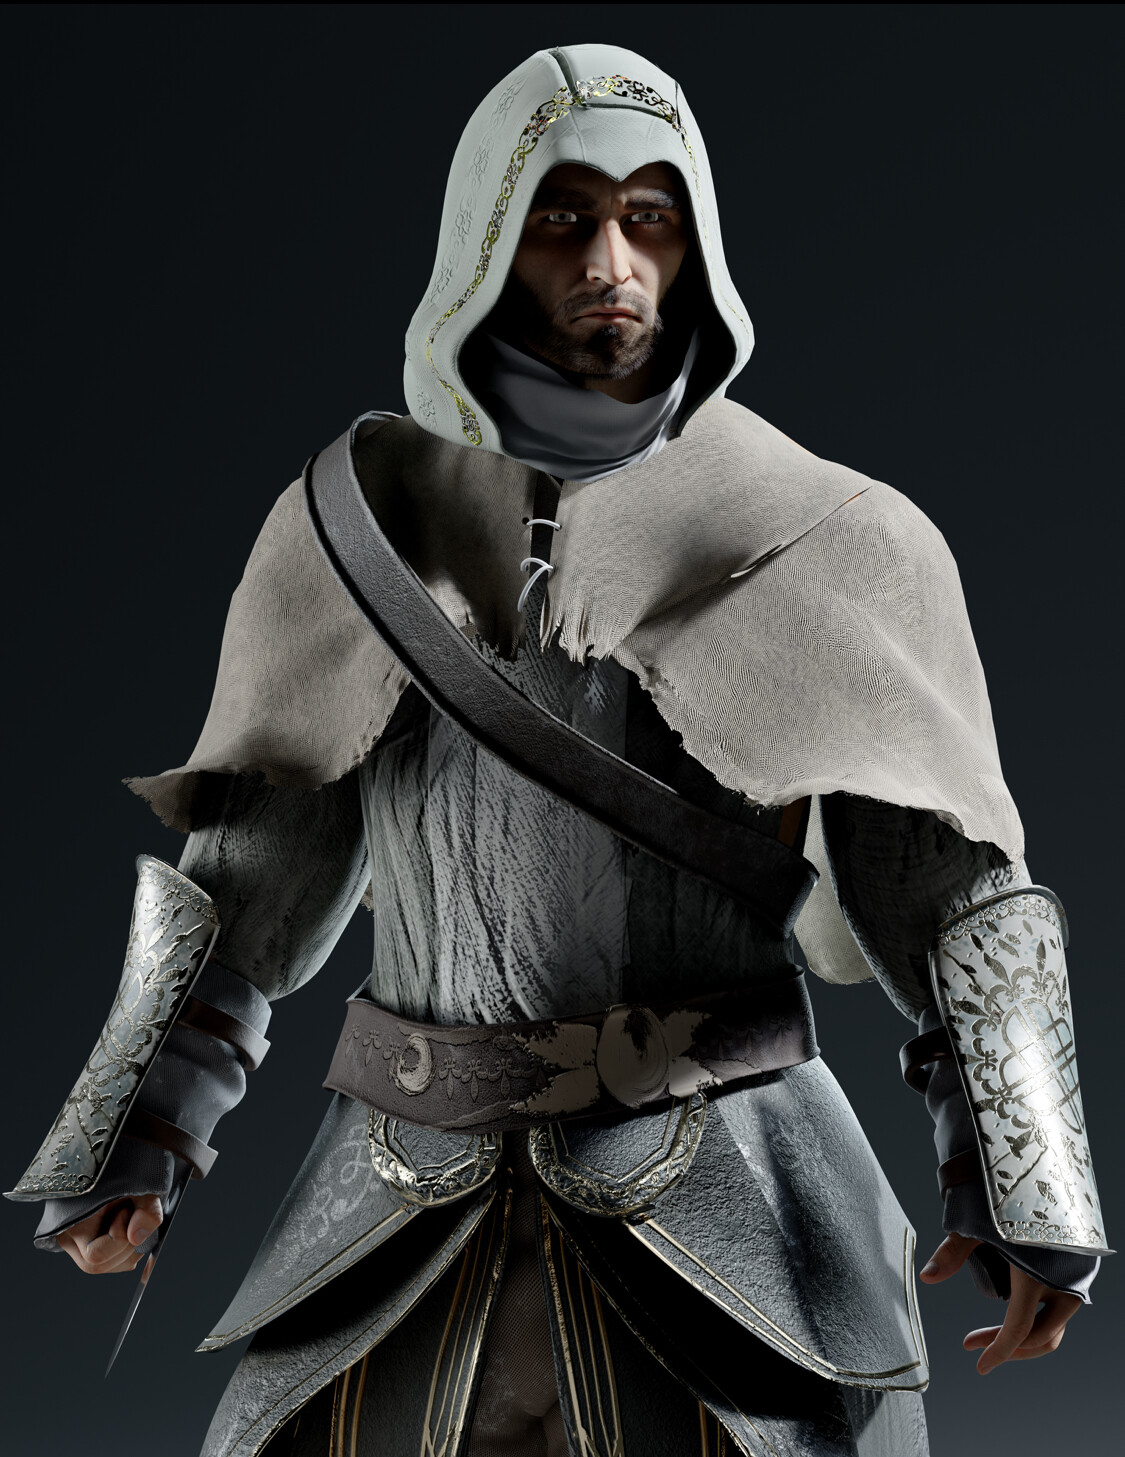 Assassins Creed Fan Art - Finished Projects - Blender Artists Community